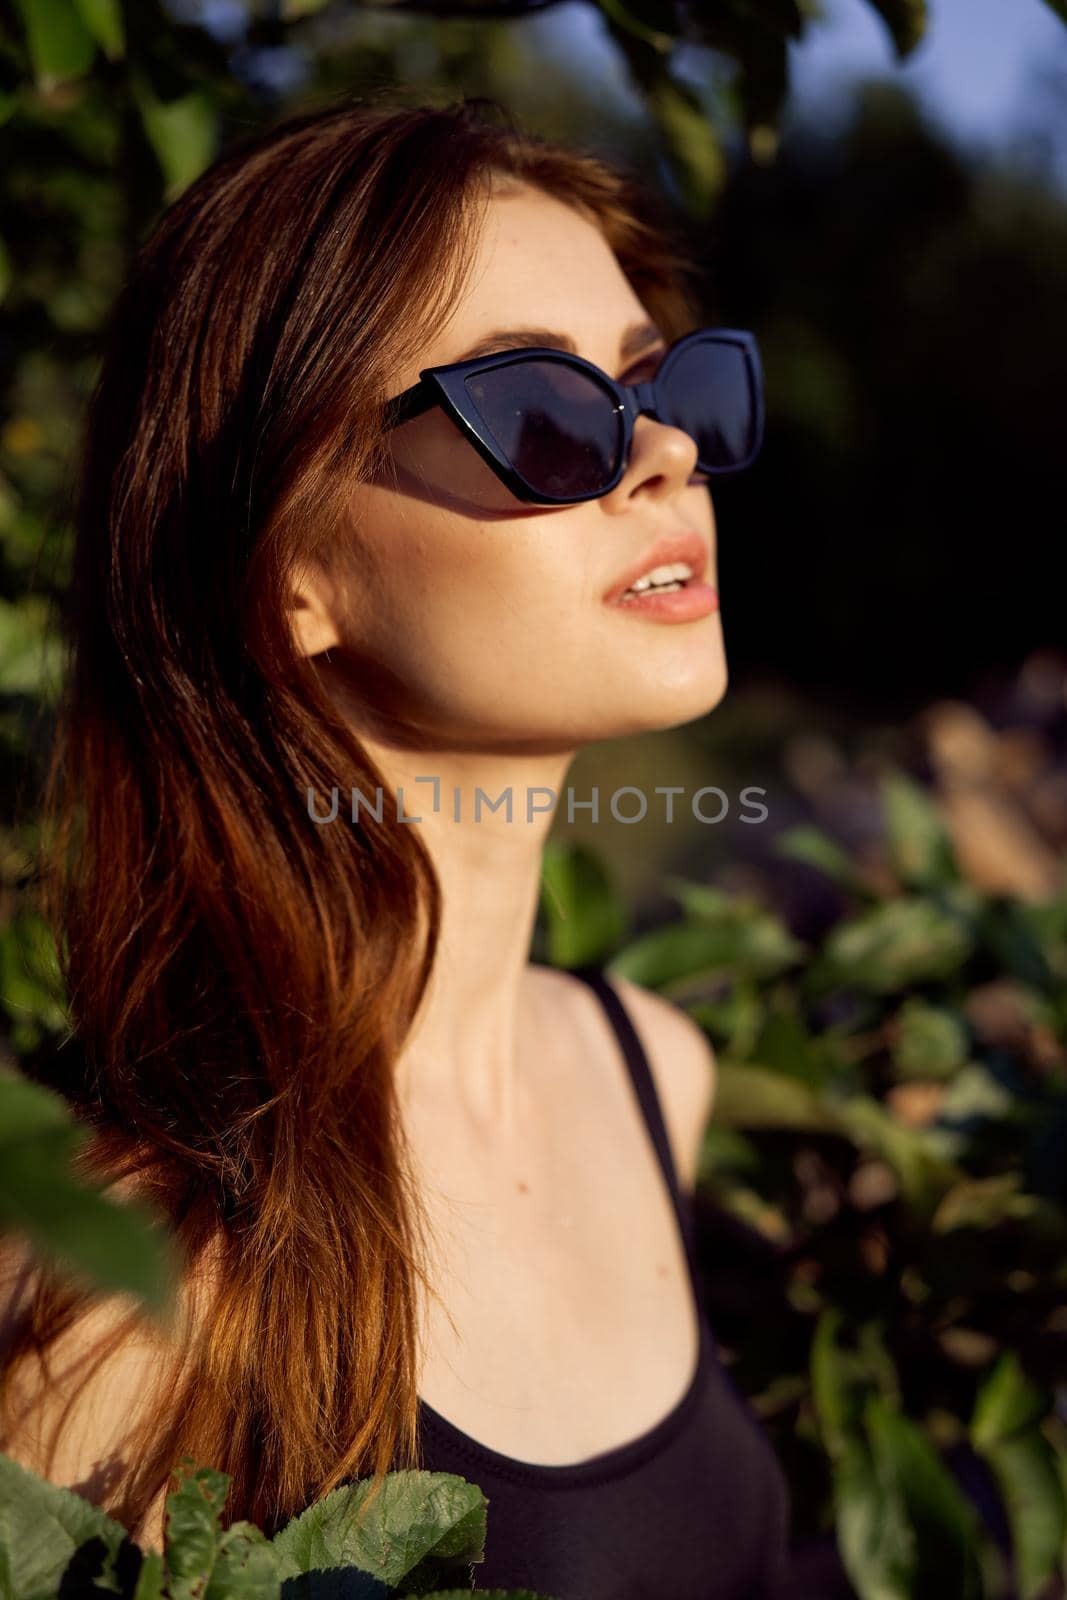 pretty woman in sunglasses in summer outdoors green leaves. High quality photo